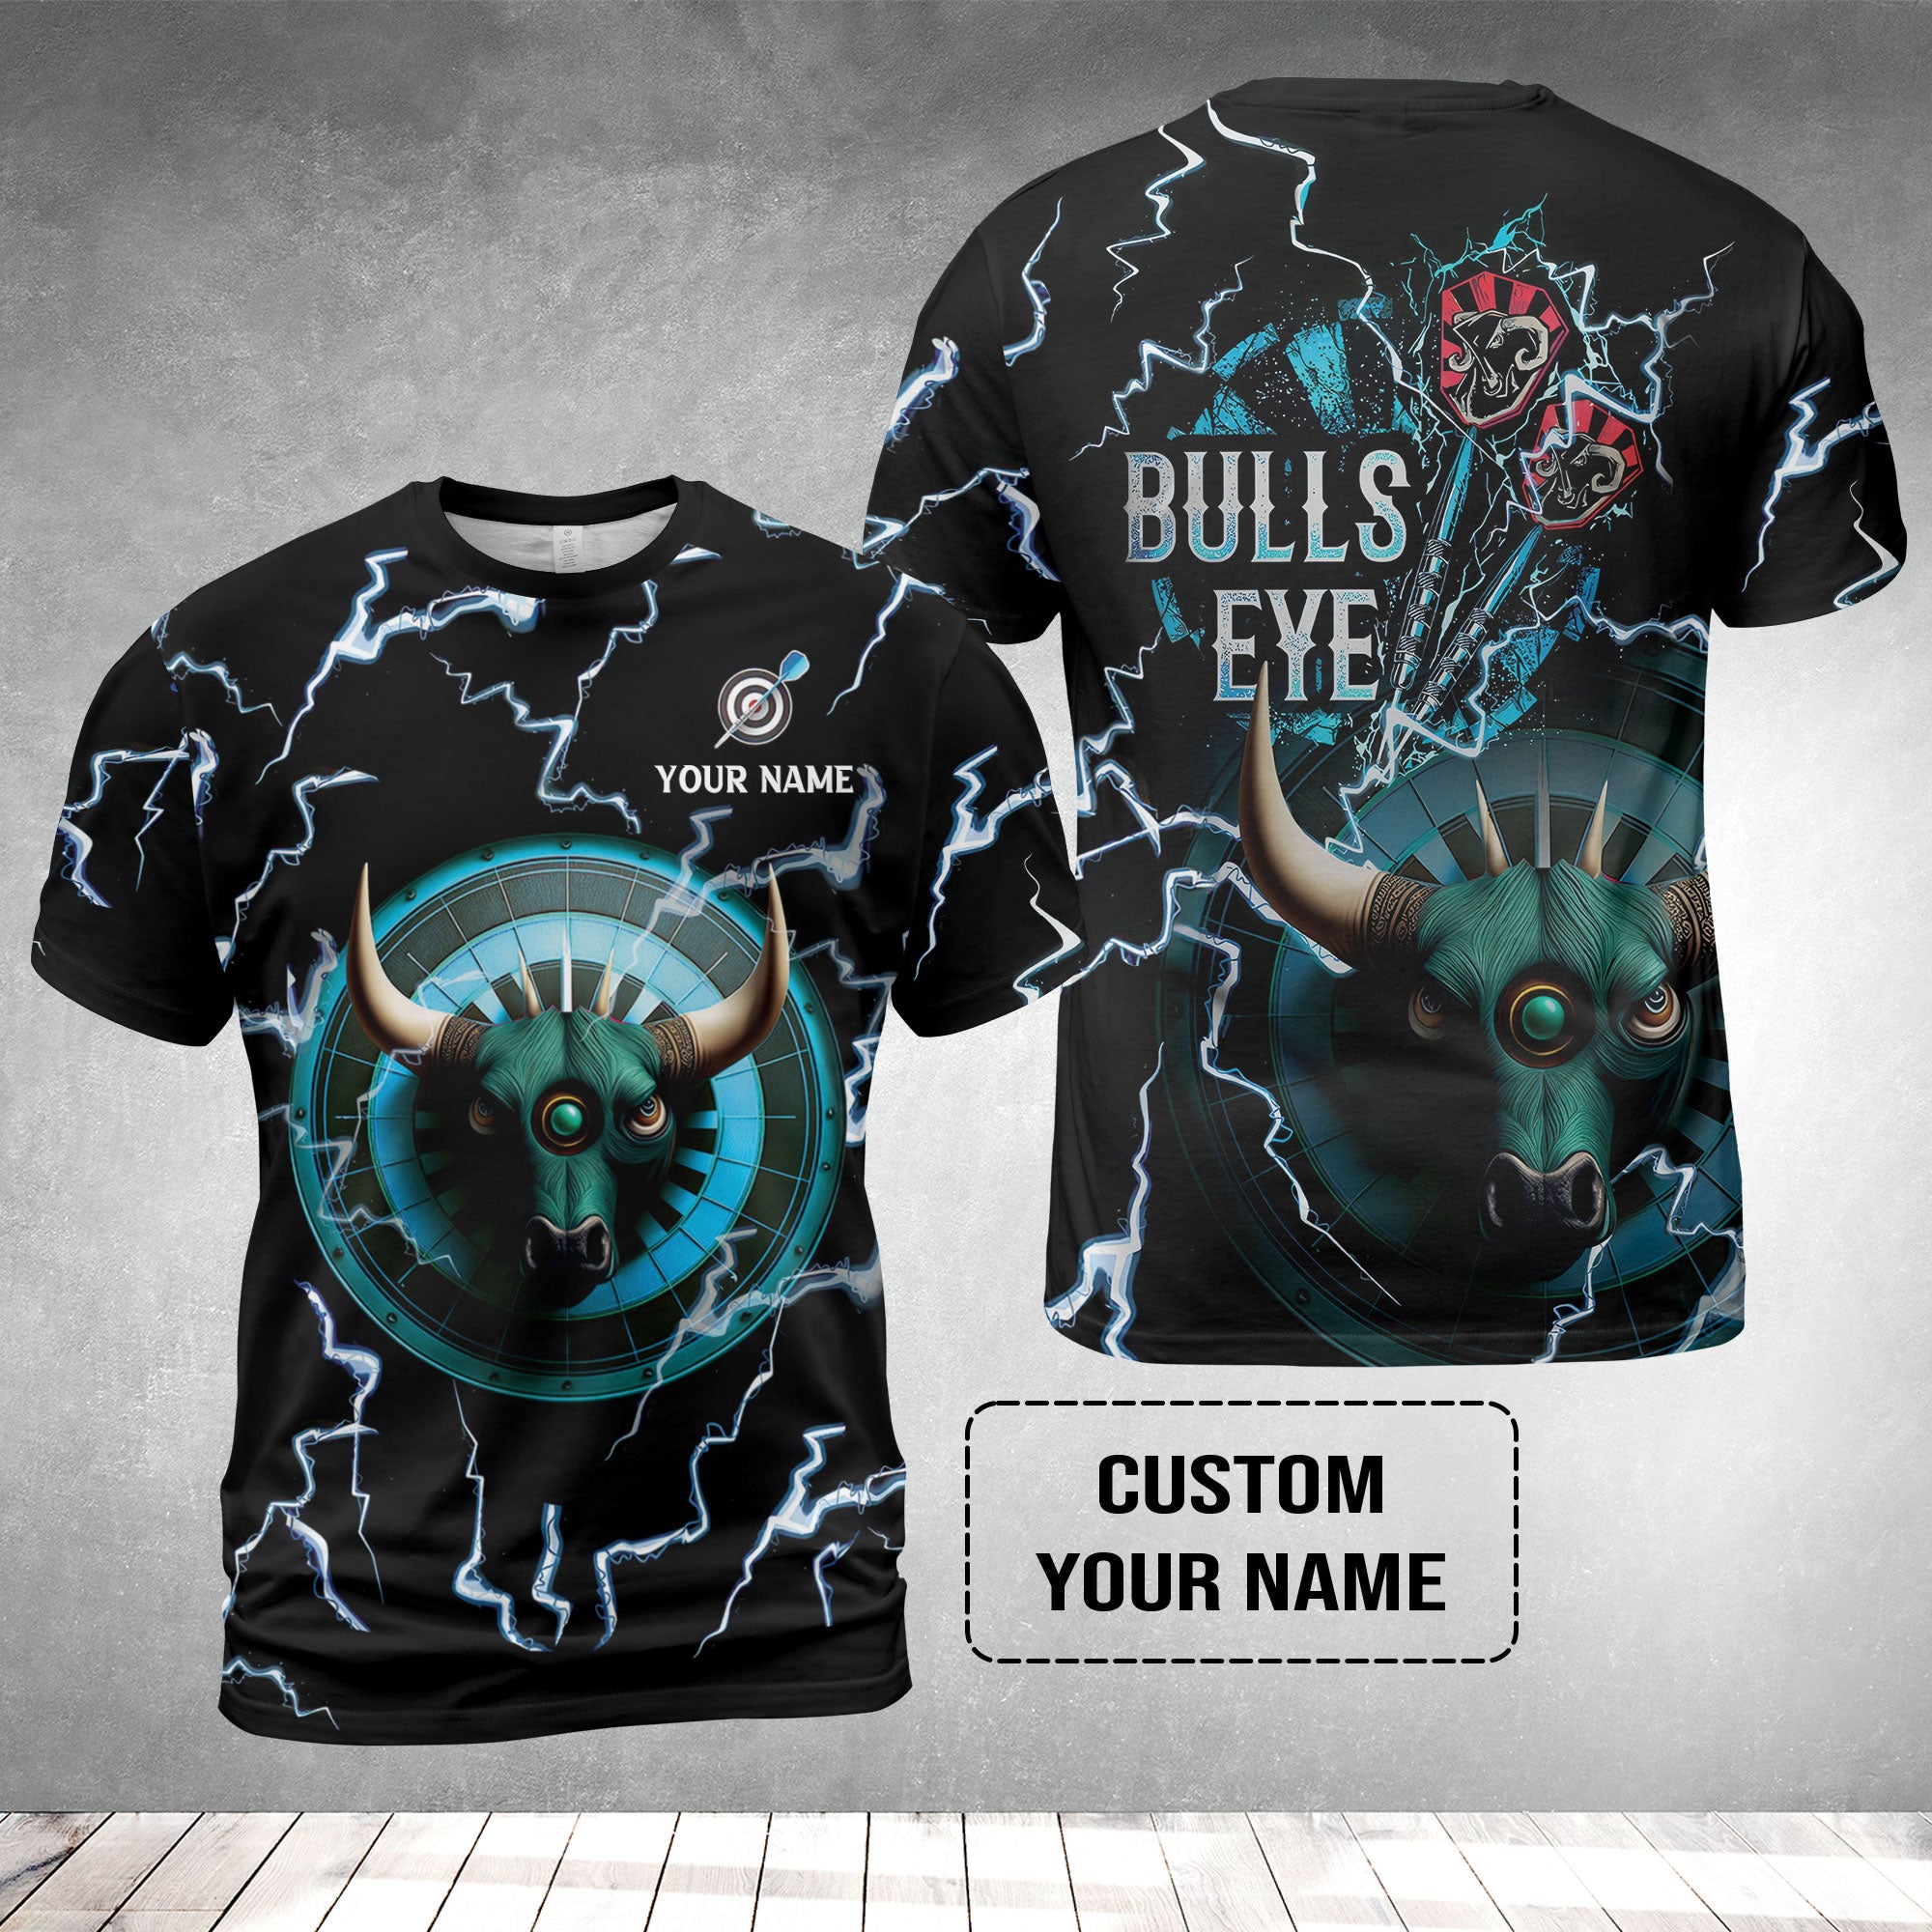 Customized Darts T-Shirt, Bullseye Dartboard, Personalized Name Darts And Bull T-Shirt For Men - Perfect Gift For Darts Lovers, Darts Players